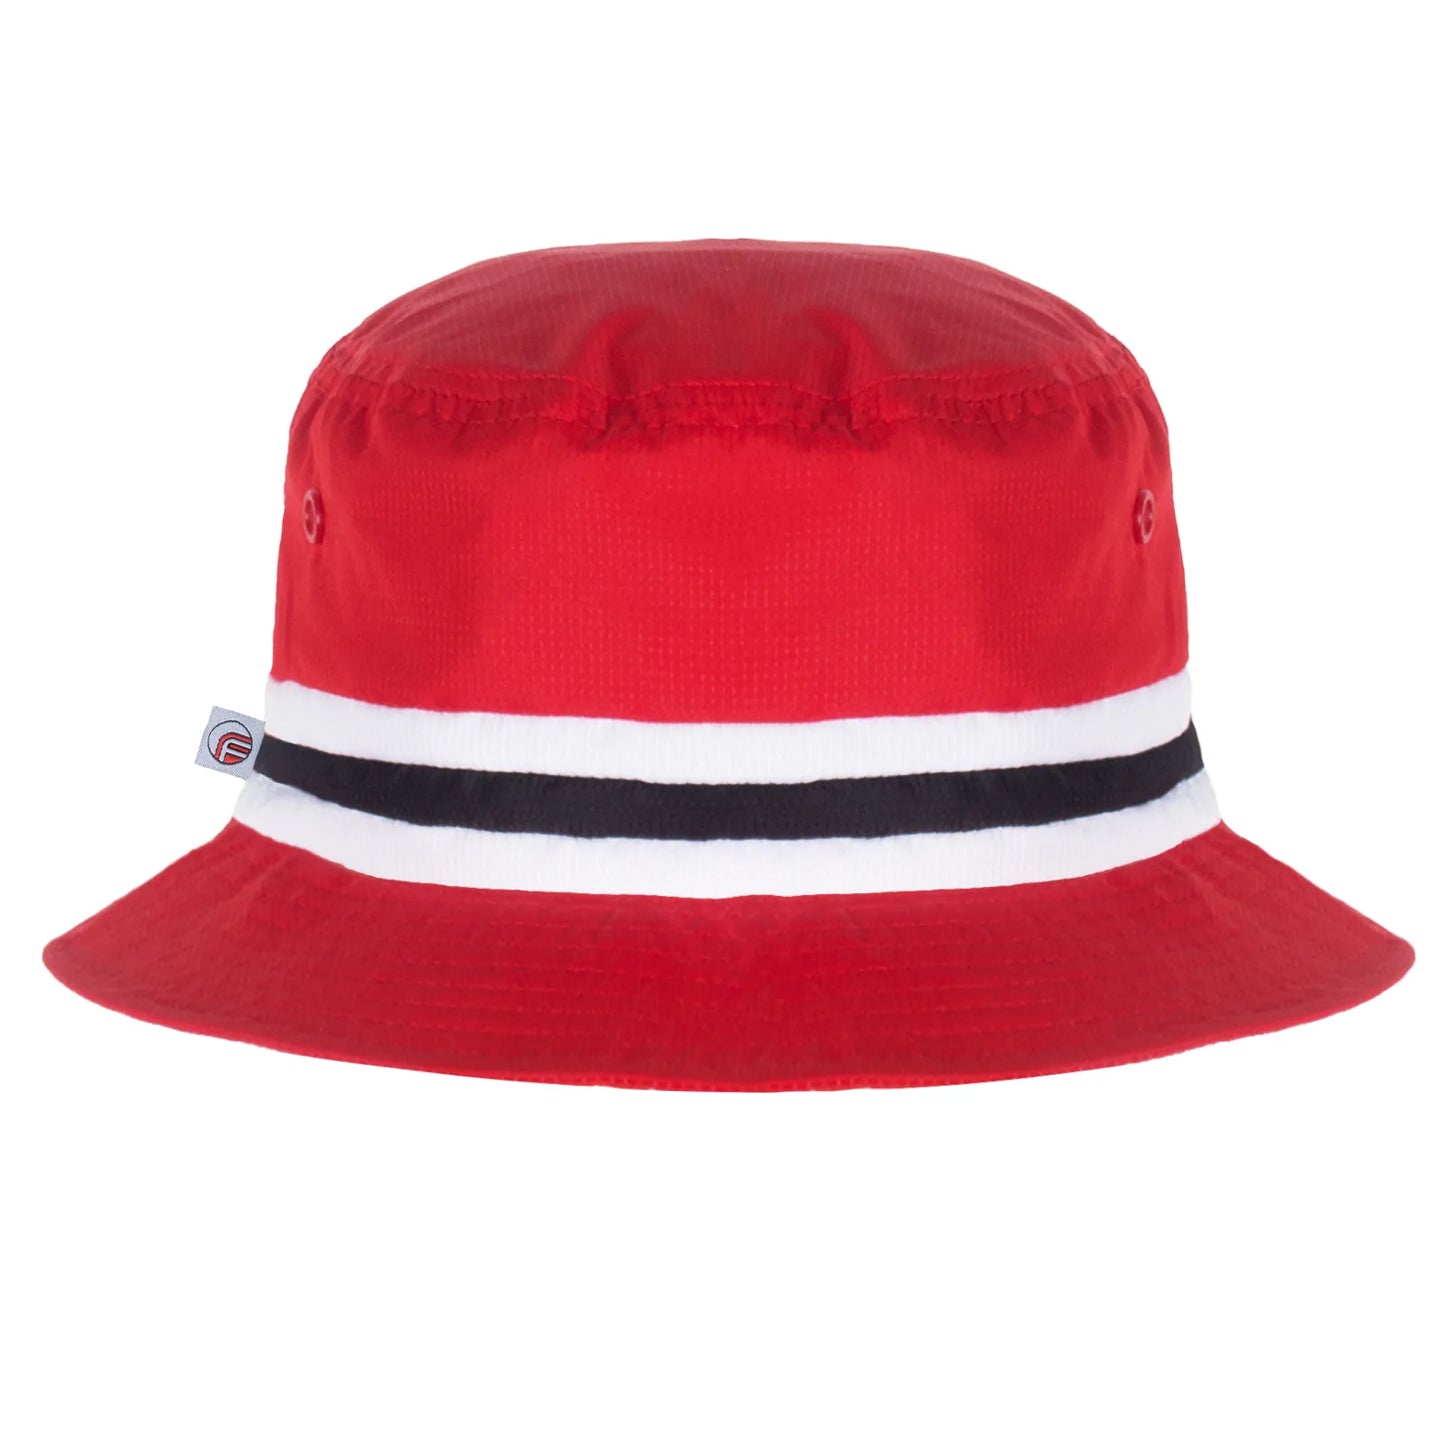 Sheffield United Colours Bucket Hat - The Great Yorkshire Shop